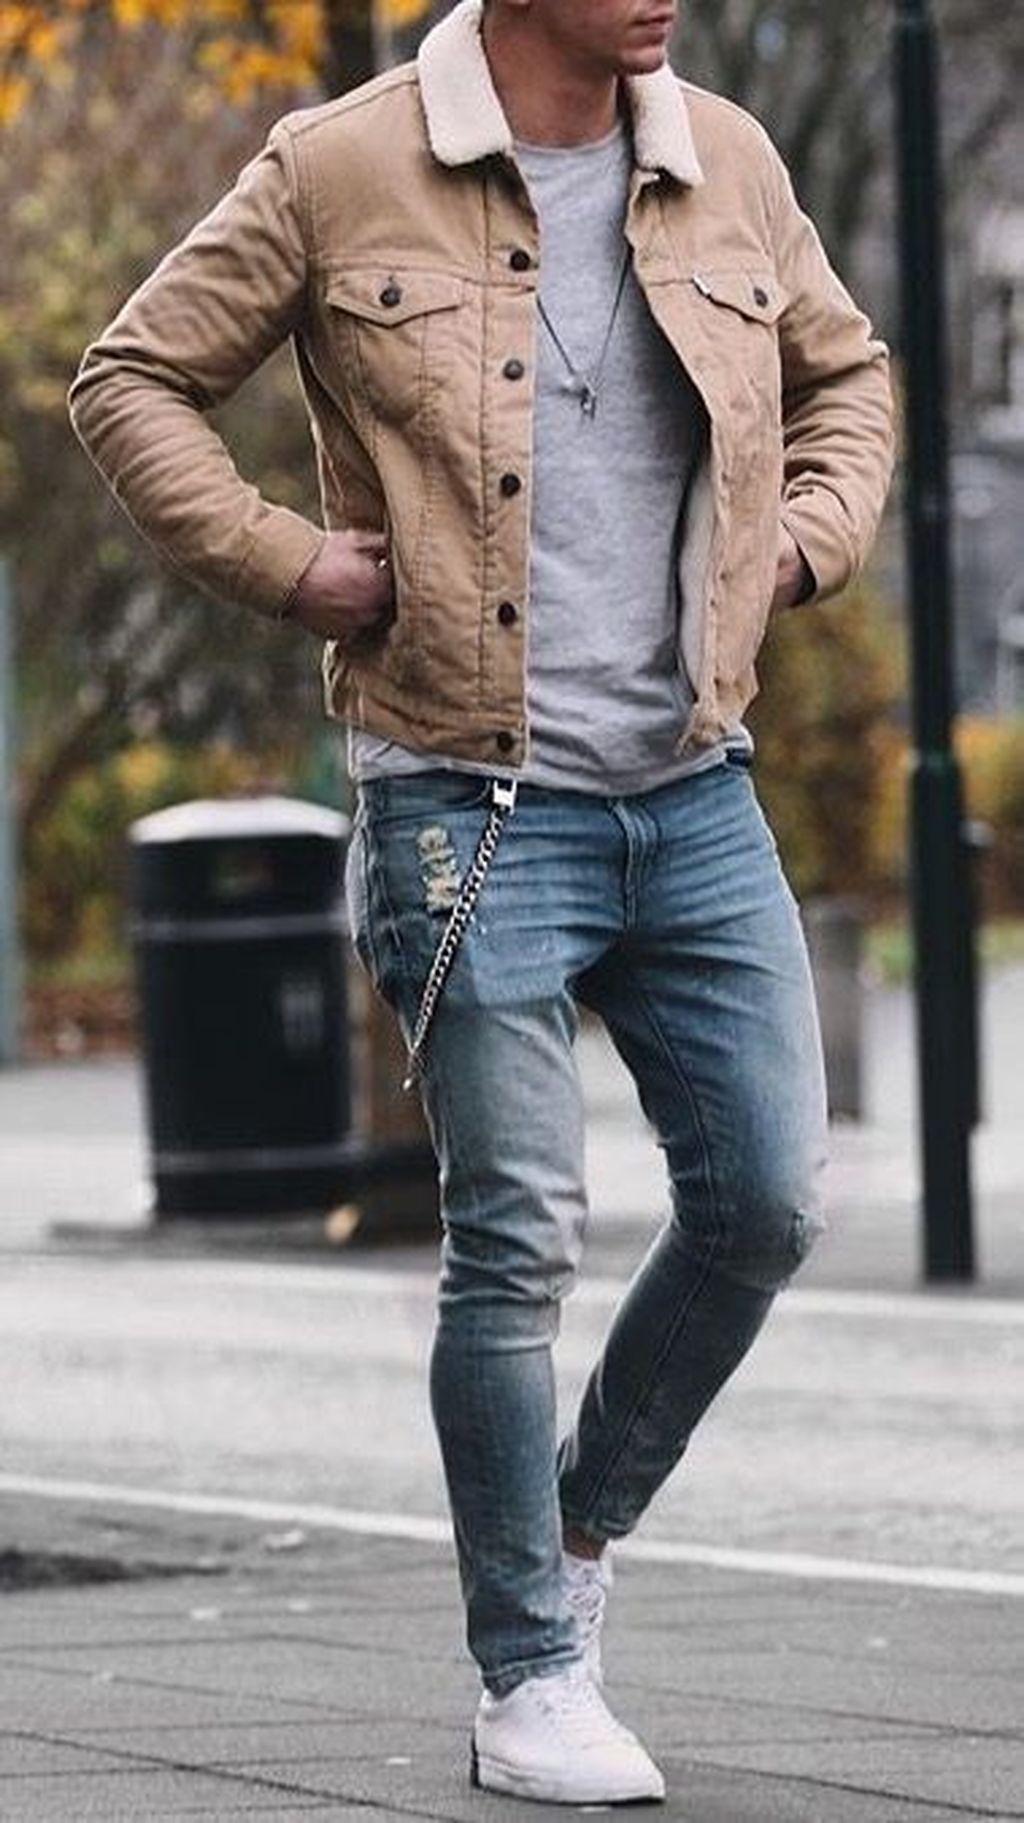 20+ Popular Outfits Ideas For Men That Looks Cool